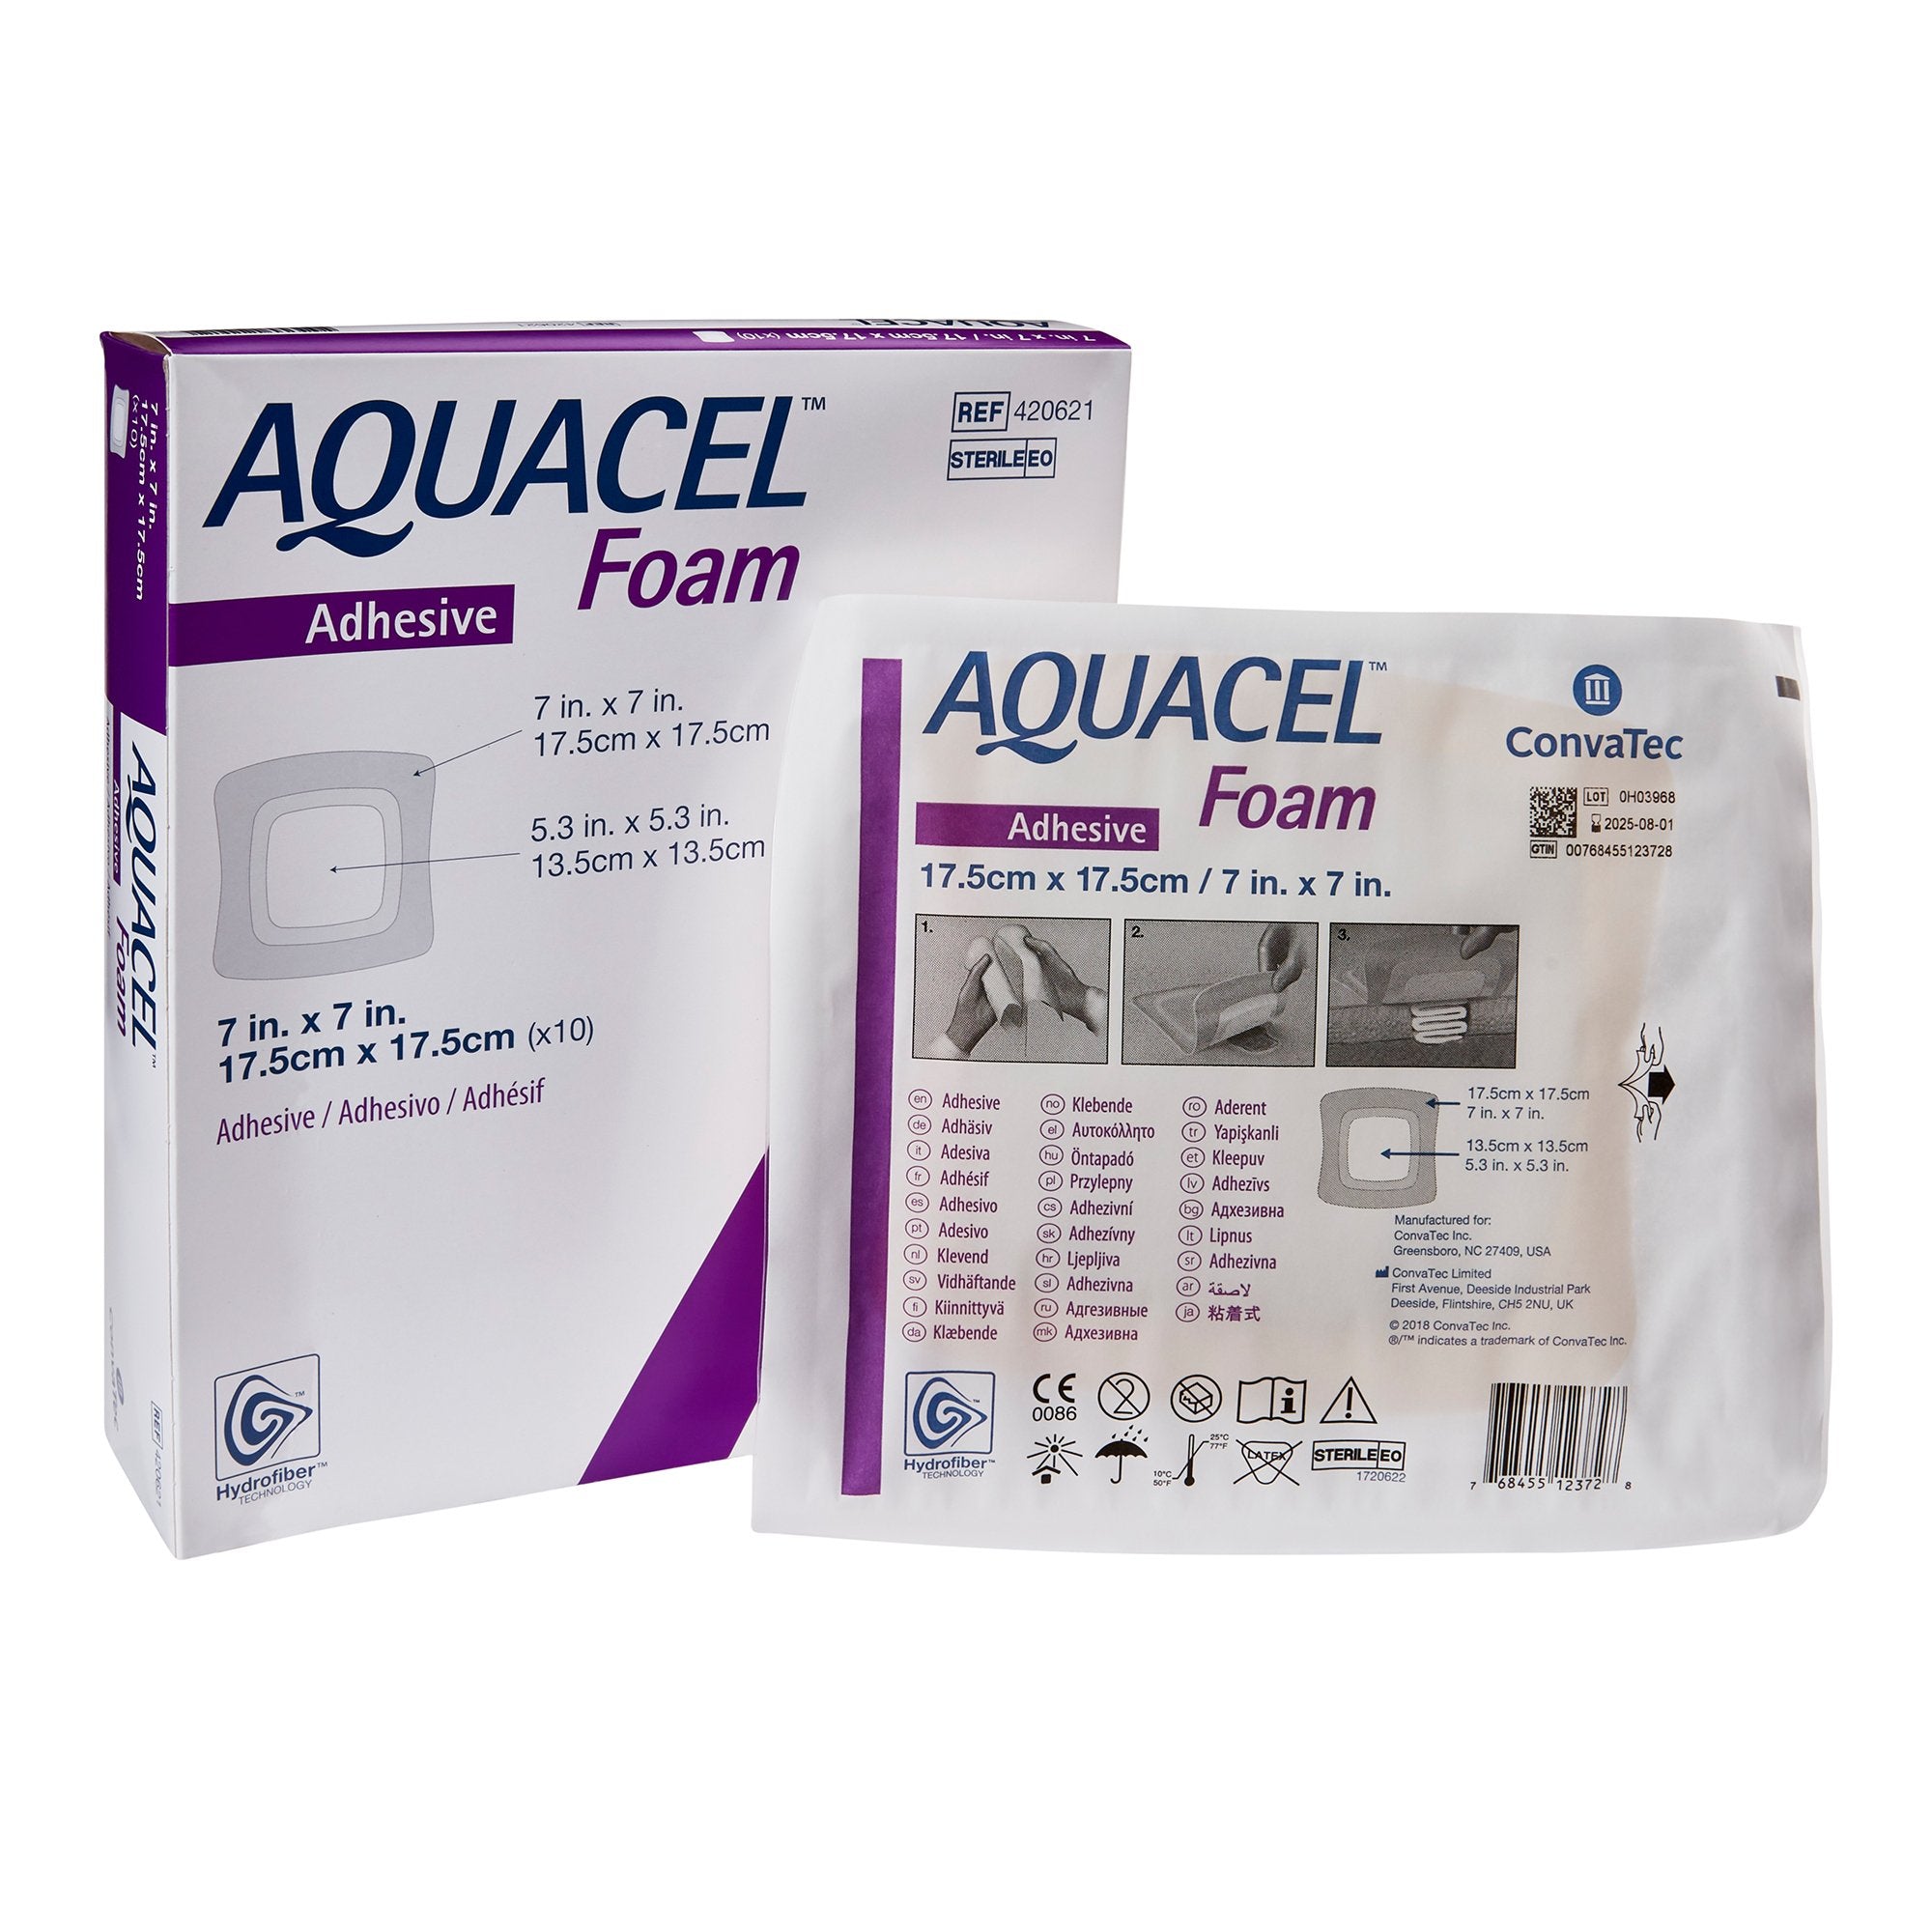 Foam Dressing Aquacel 7 X 7 Inch With Border Film Backing Silicone Adhesive Square Sterile